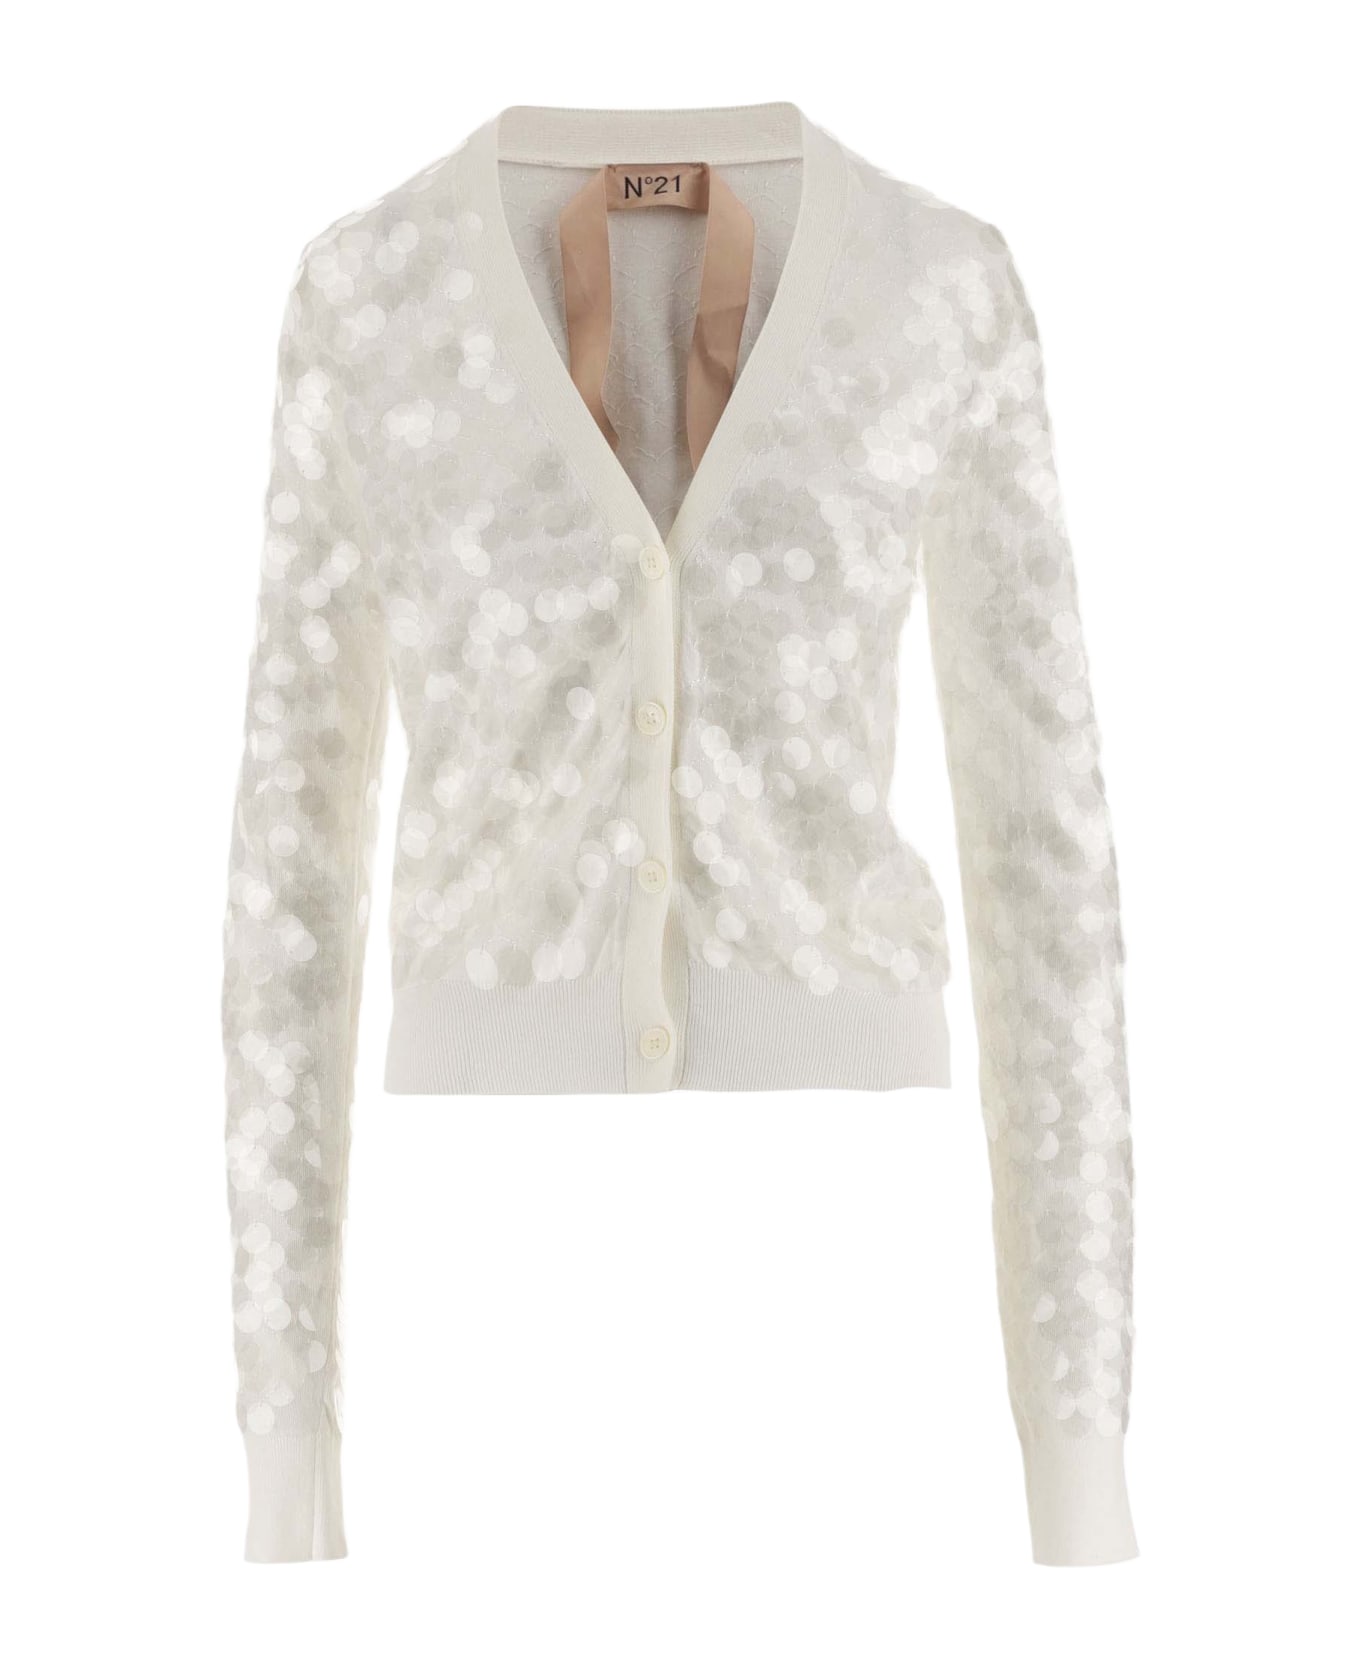 N.21 Sequined Cotton Cardigan - White